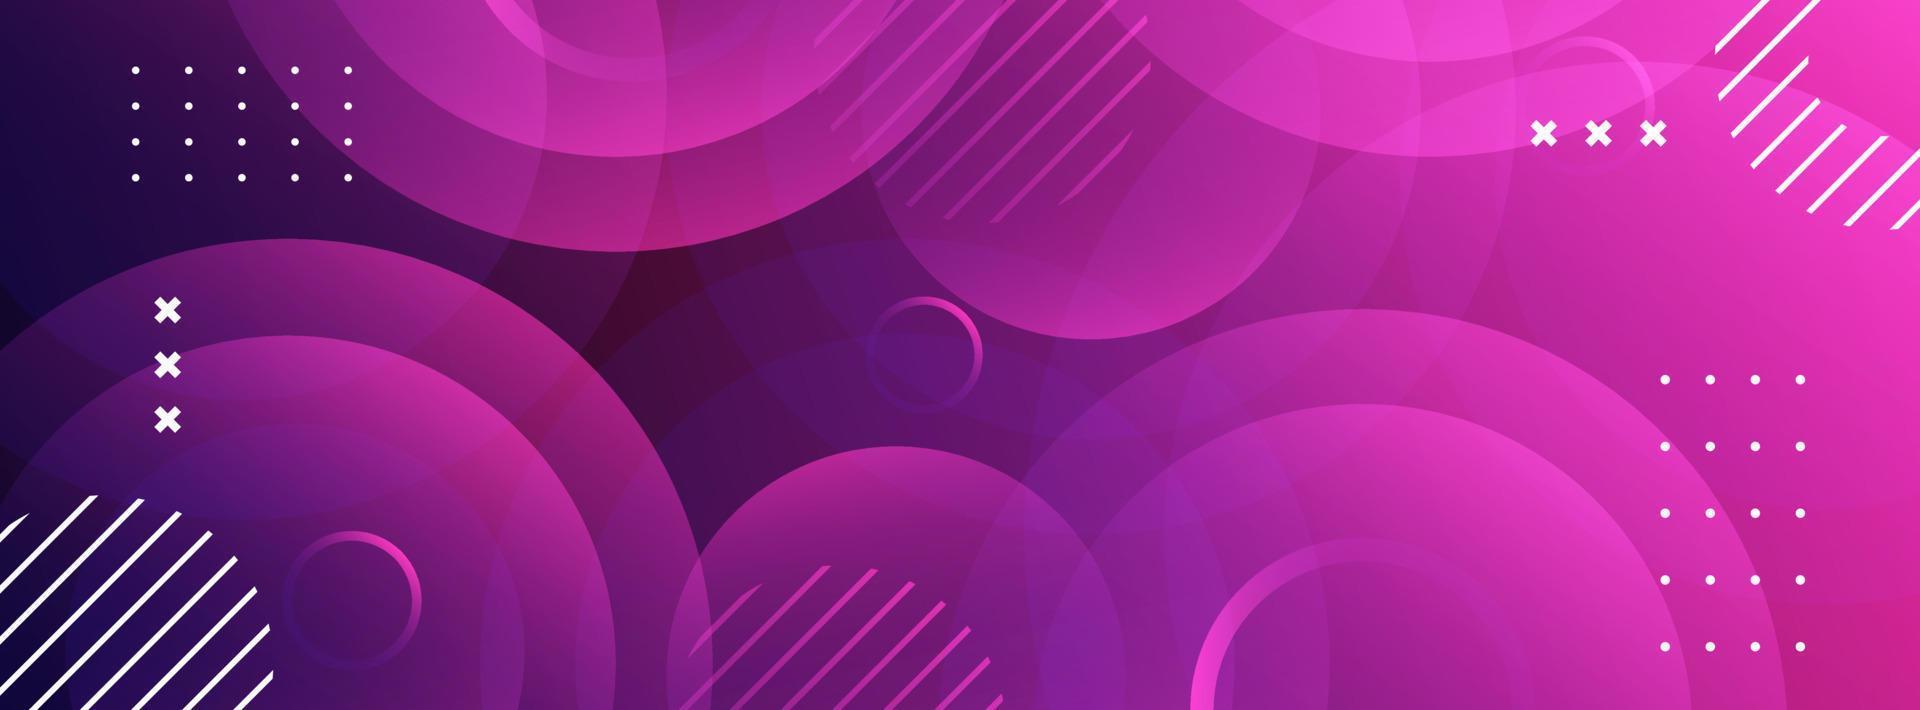 banner background. full color, purple and black gradations, geometric circles vector